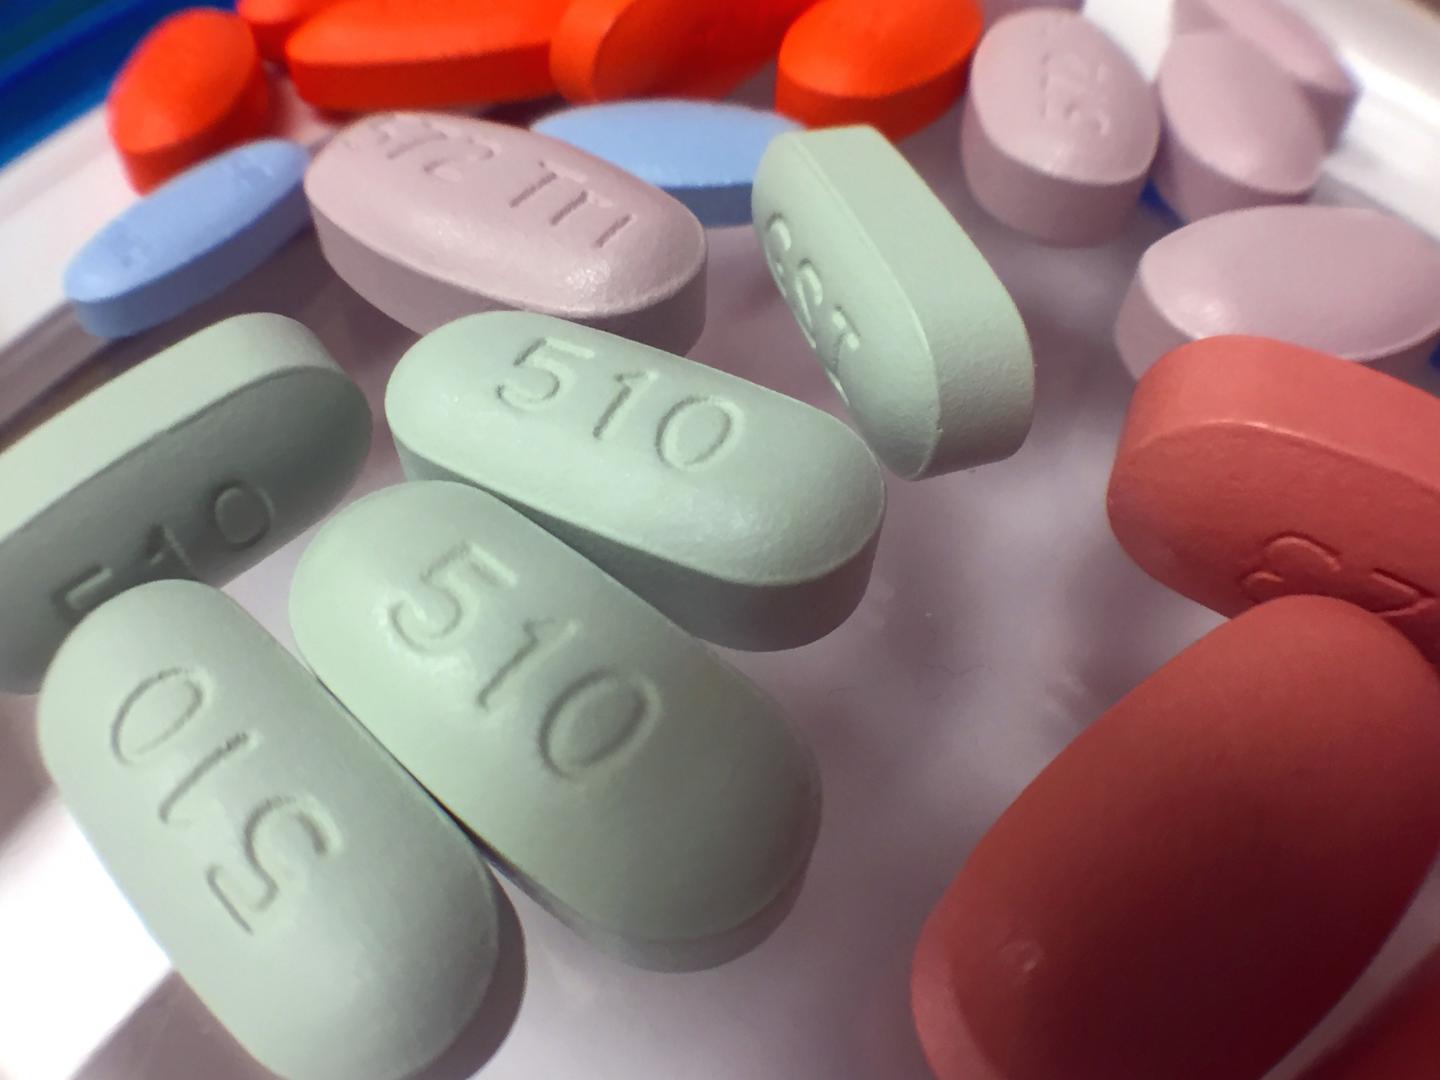 A Variety of Antiretroviral Drugs Used to Treat HIV Infection